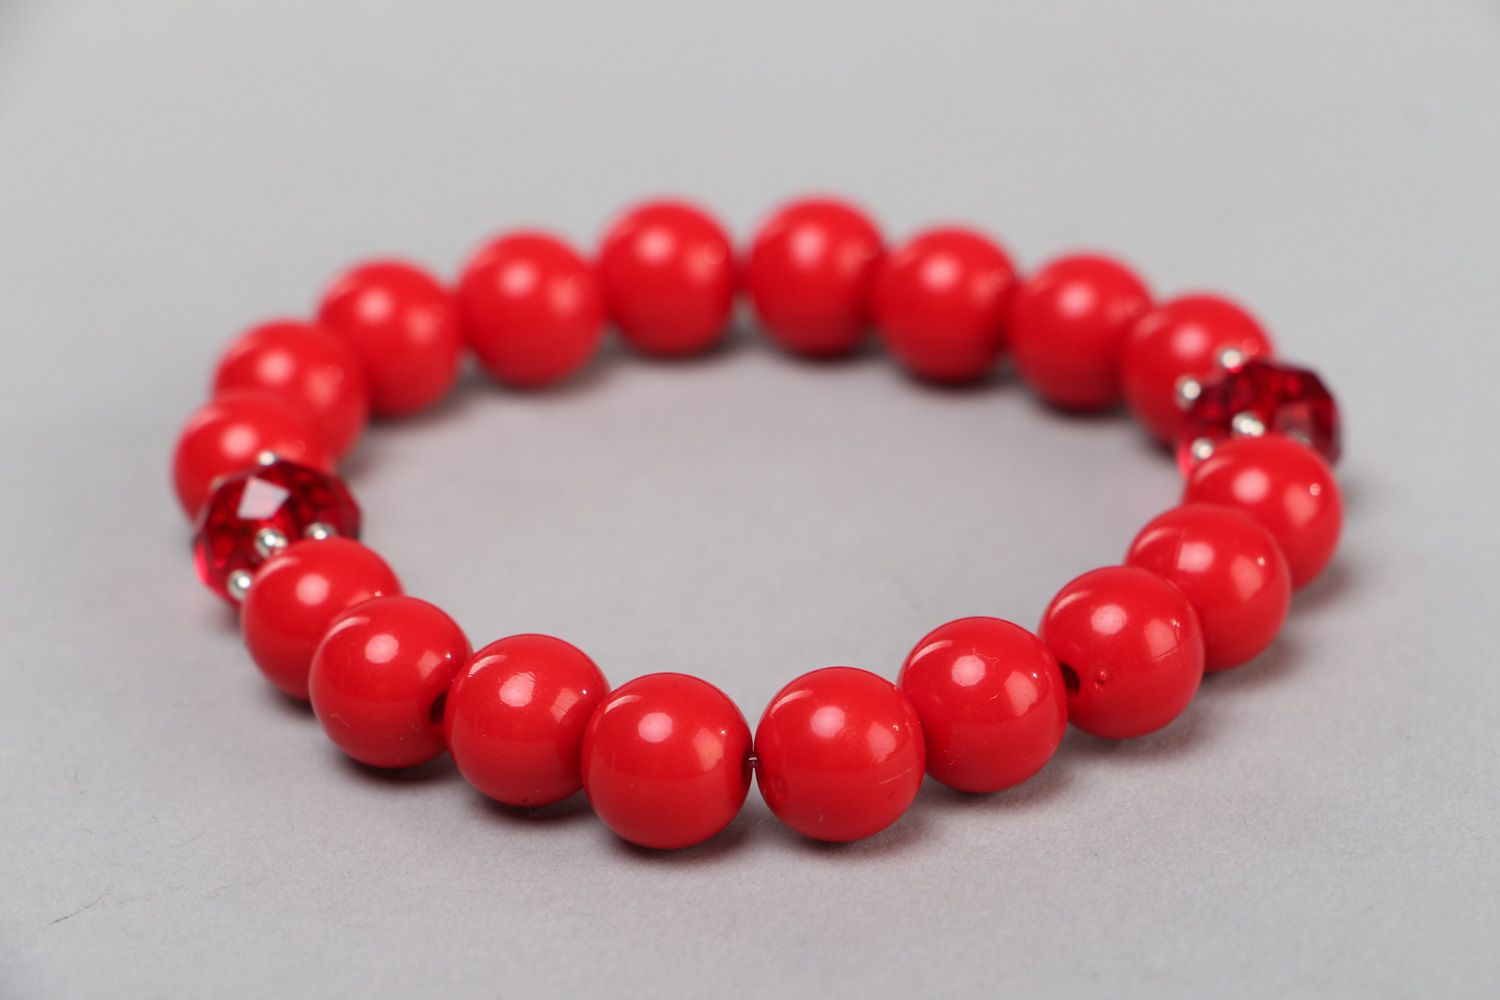 Handmade wrist bracelet with bright red plastic and glass beads for women photo 1